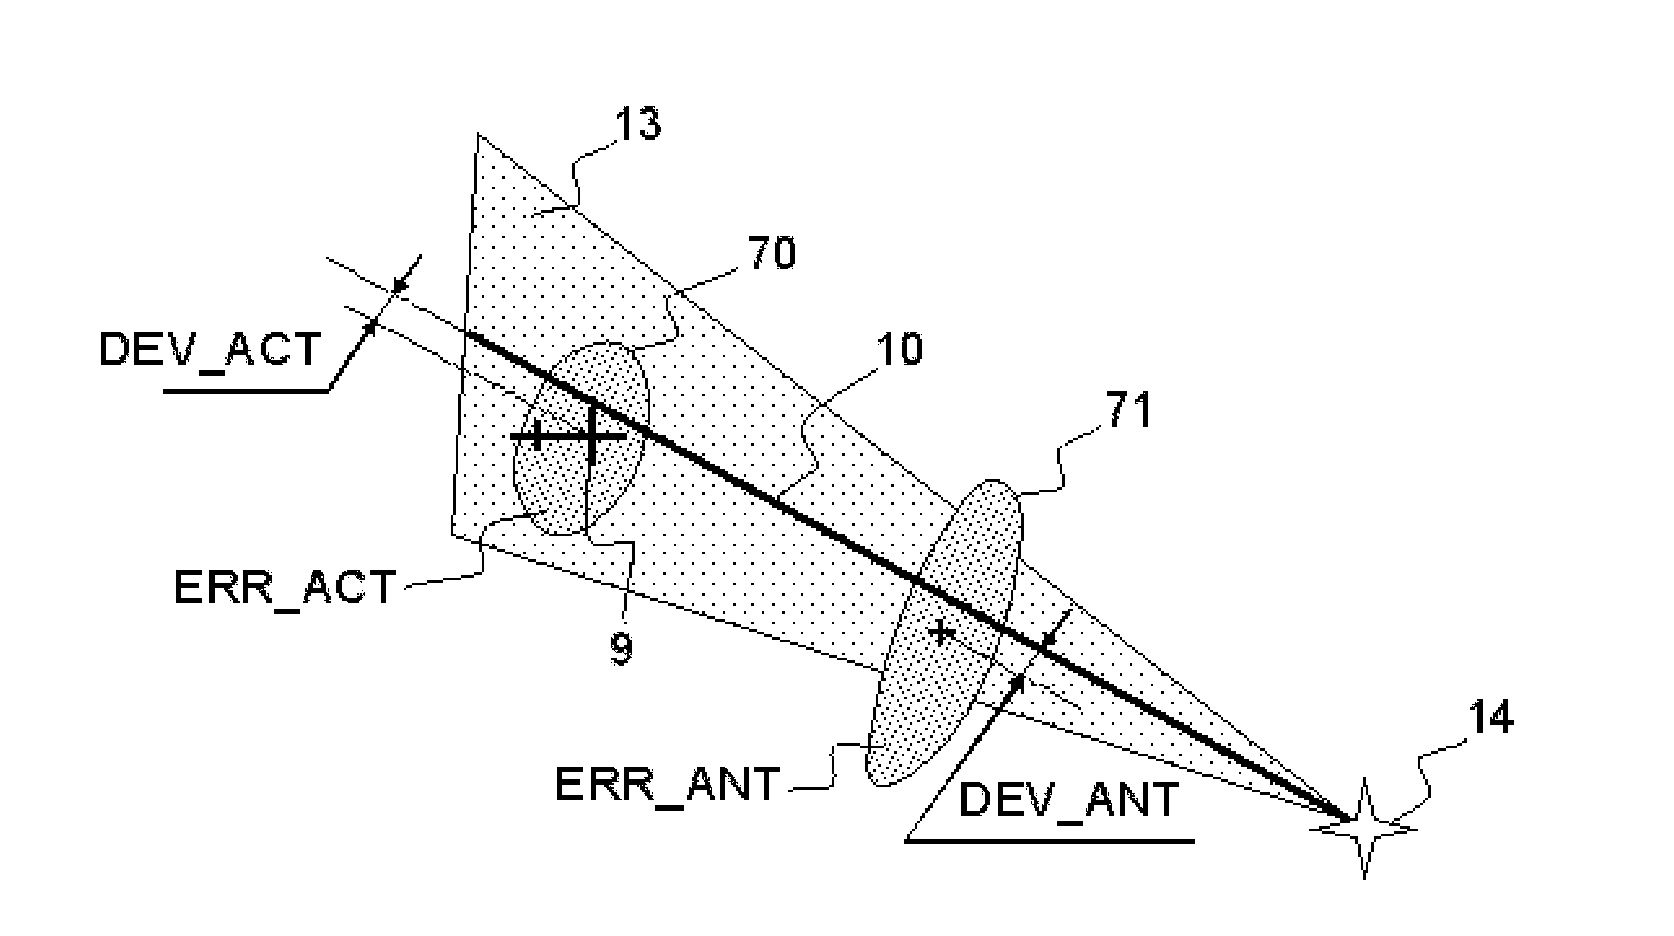 Navigation Assistance Method Based on Anticipation of Linear or Angular Deviations